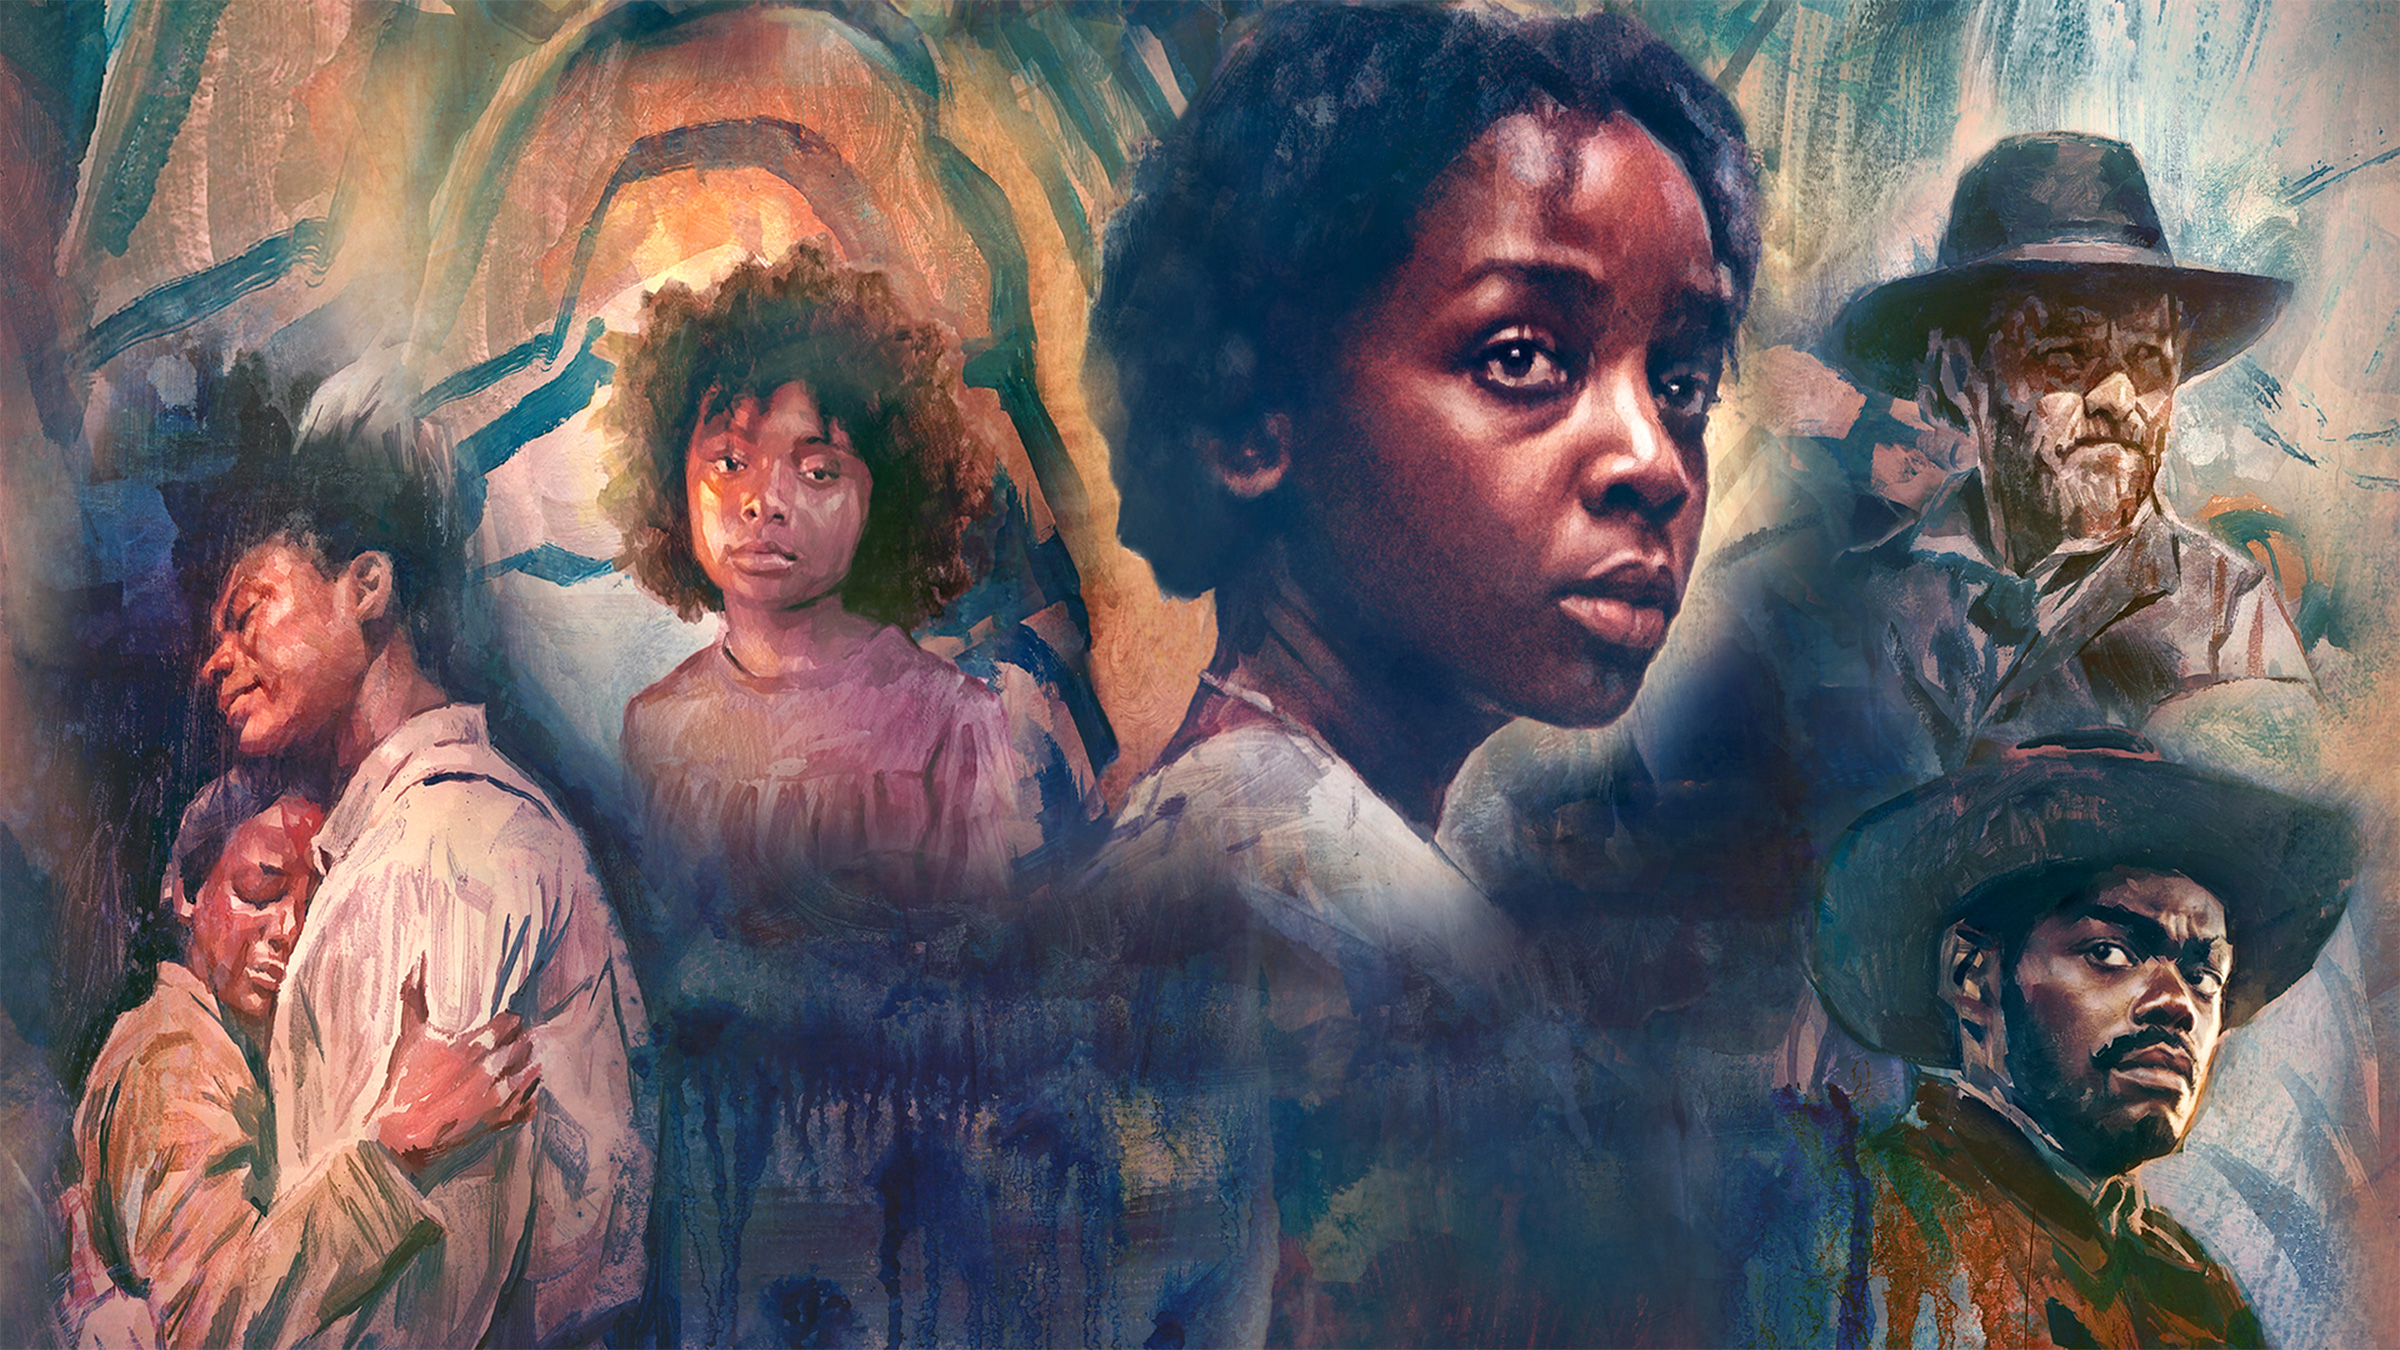 Art of the Cut: Editing Barry Jenkins’ “The Underground Railroad”